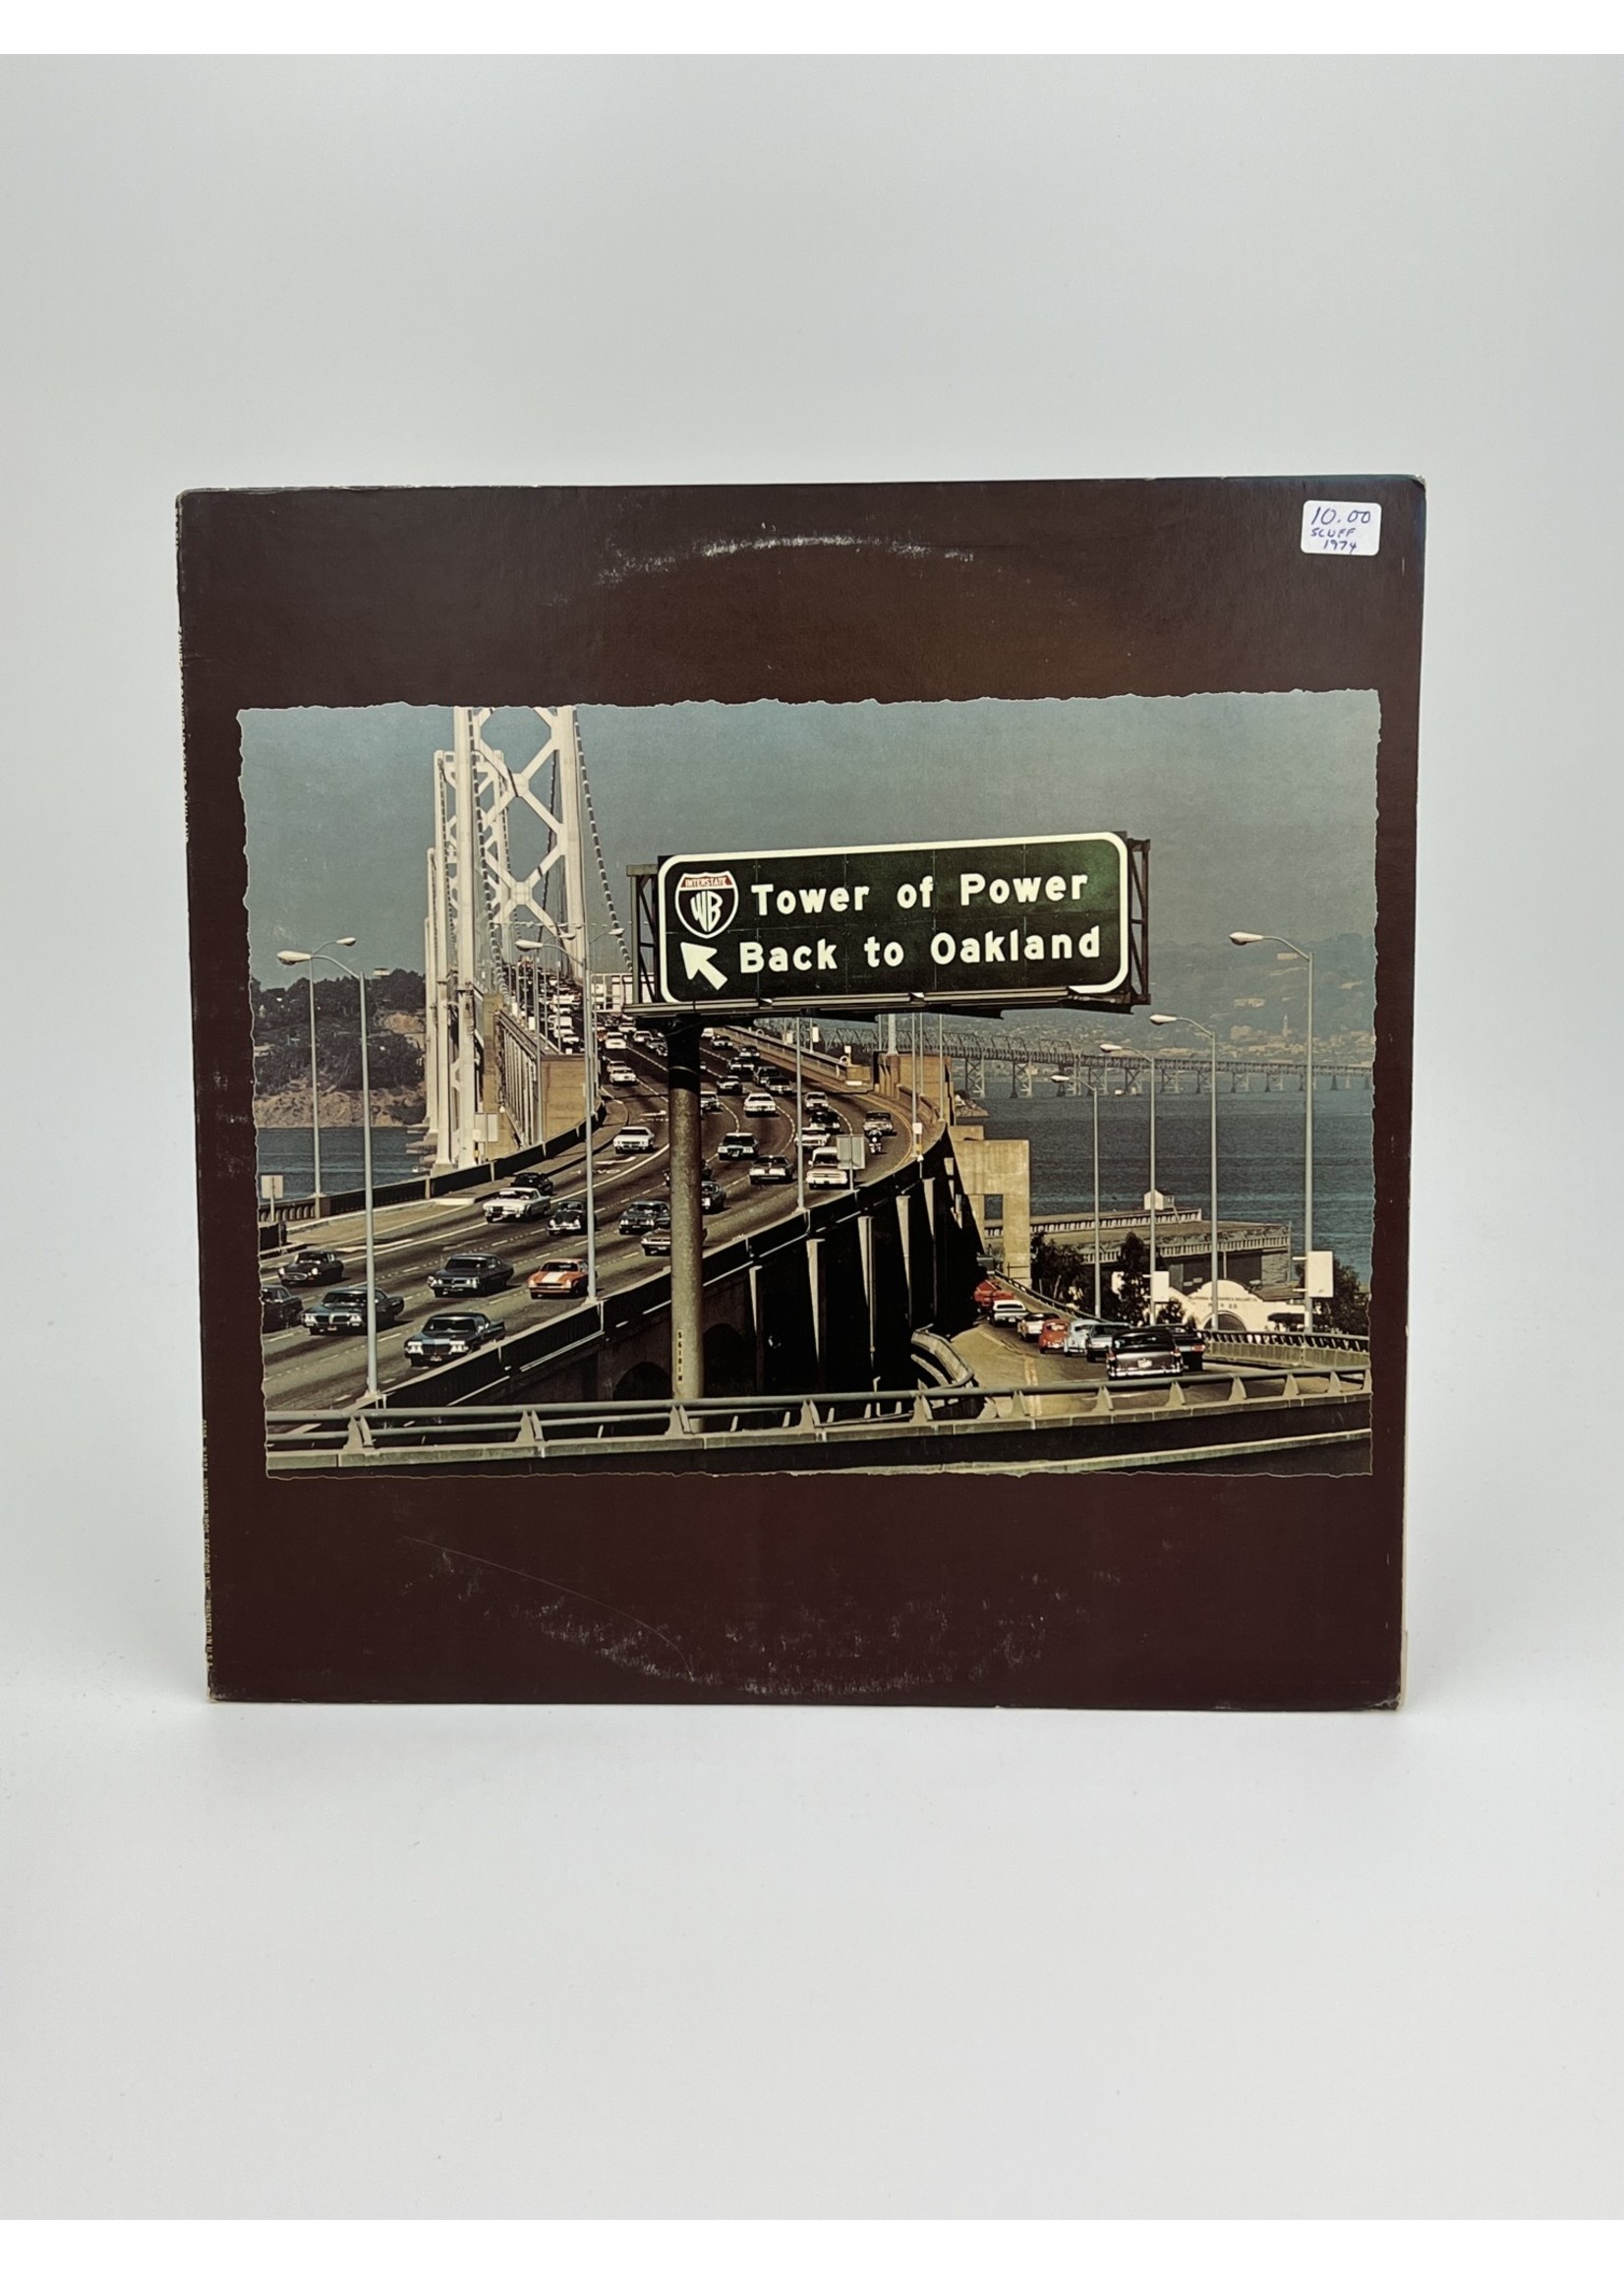 LP Tower of Power Back to Oakland LP Record